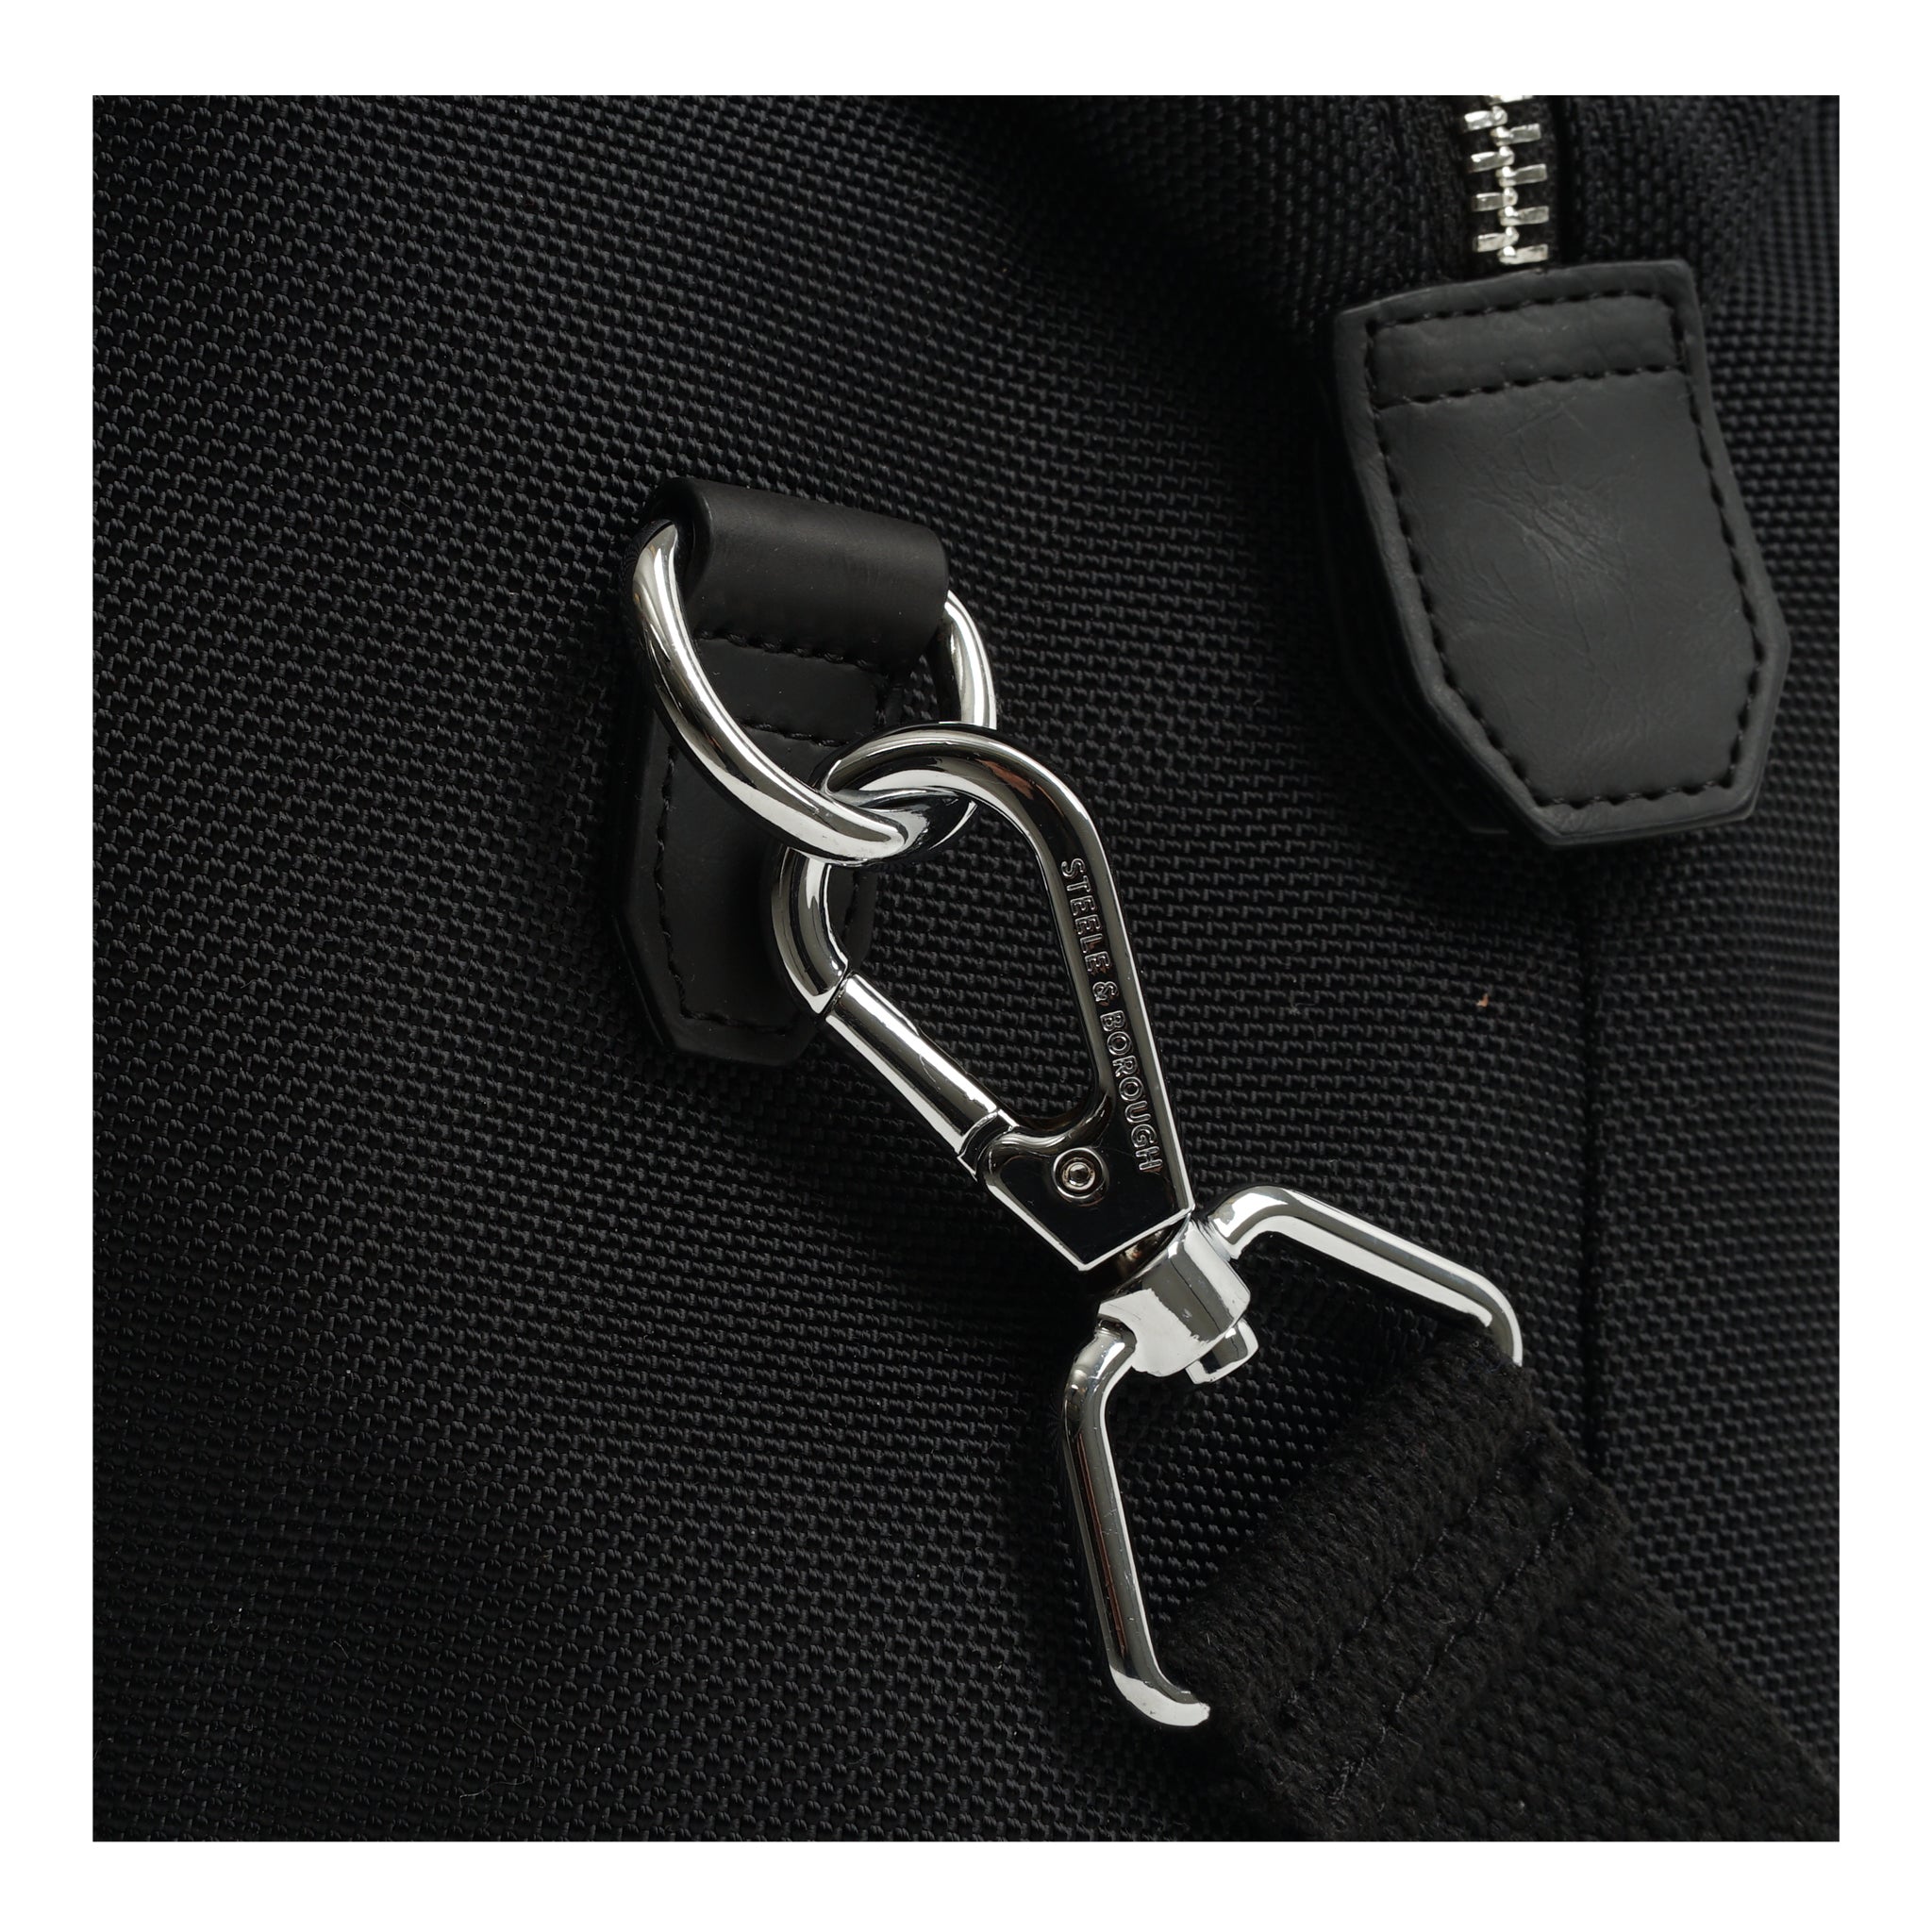 Detailed view of the black Weekend Bag's hook and clasp, highlighting the secure and stylish hardware